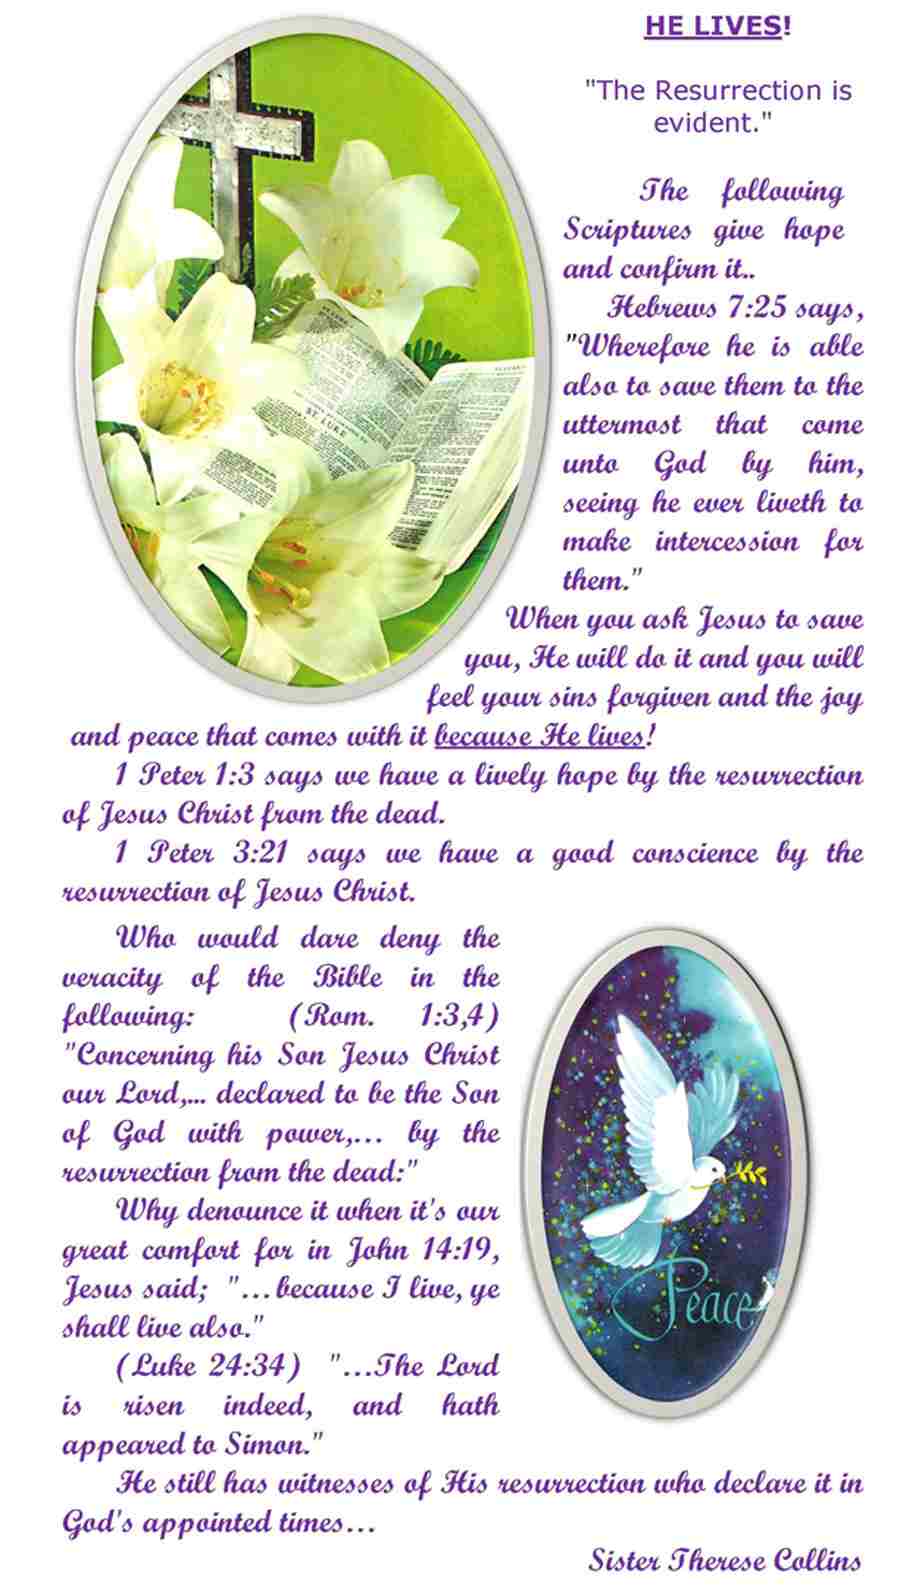 Easter Message 2012